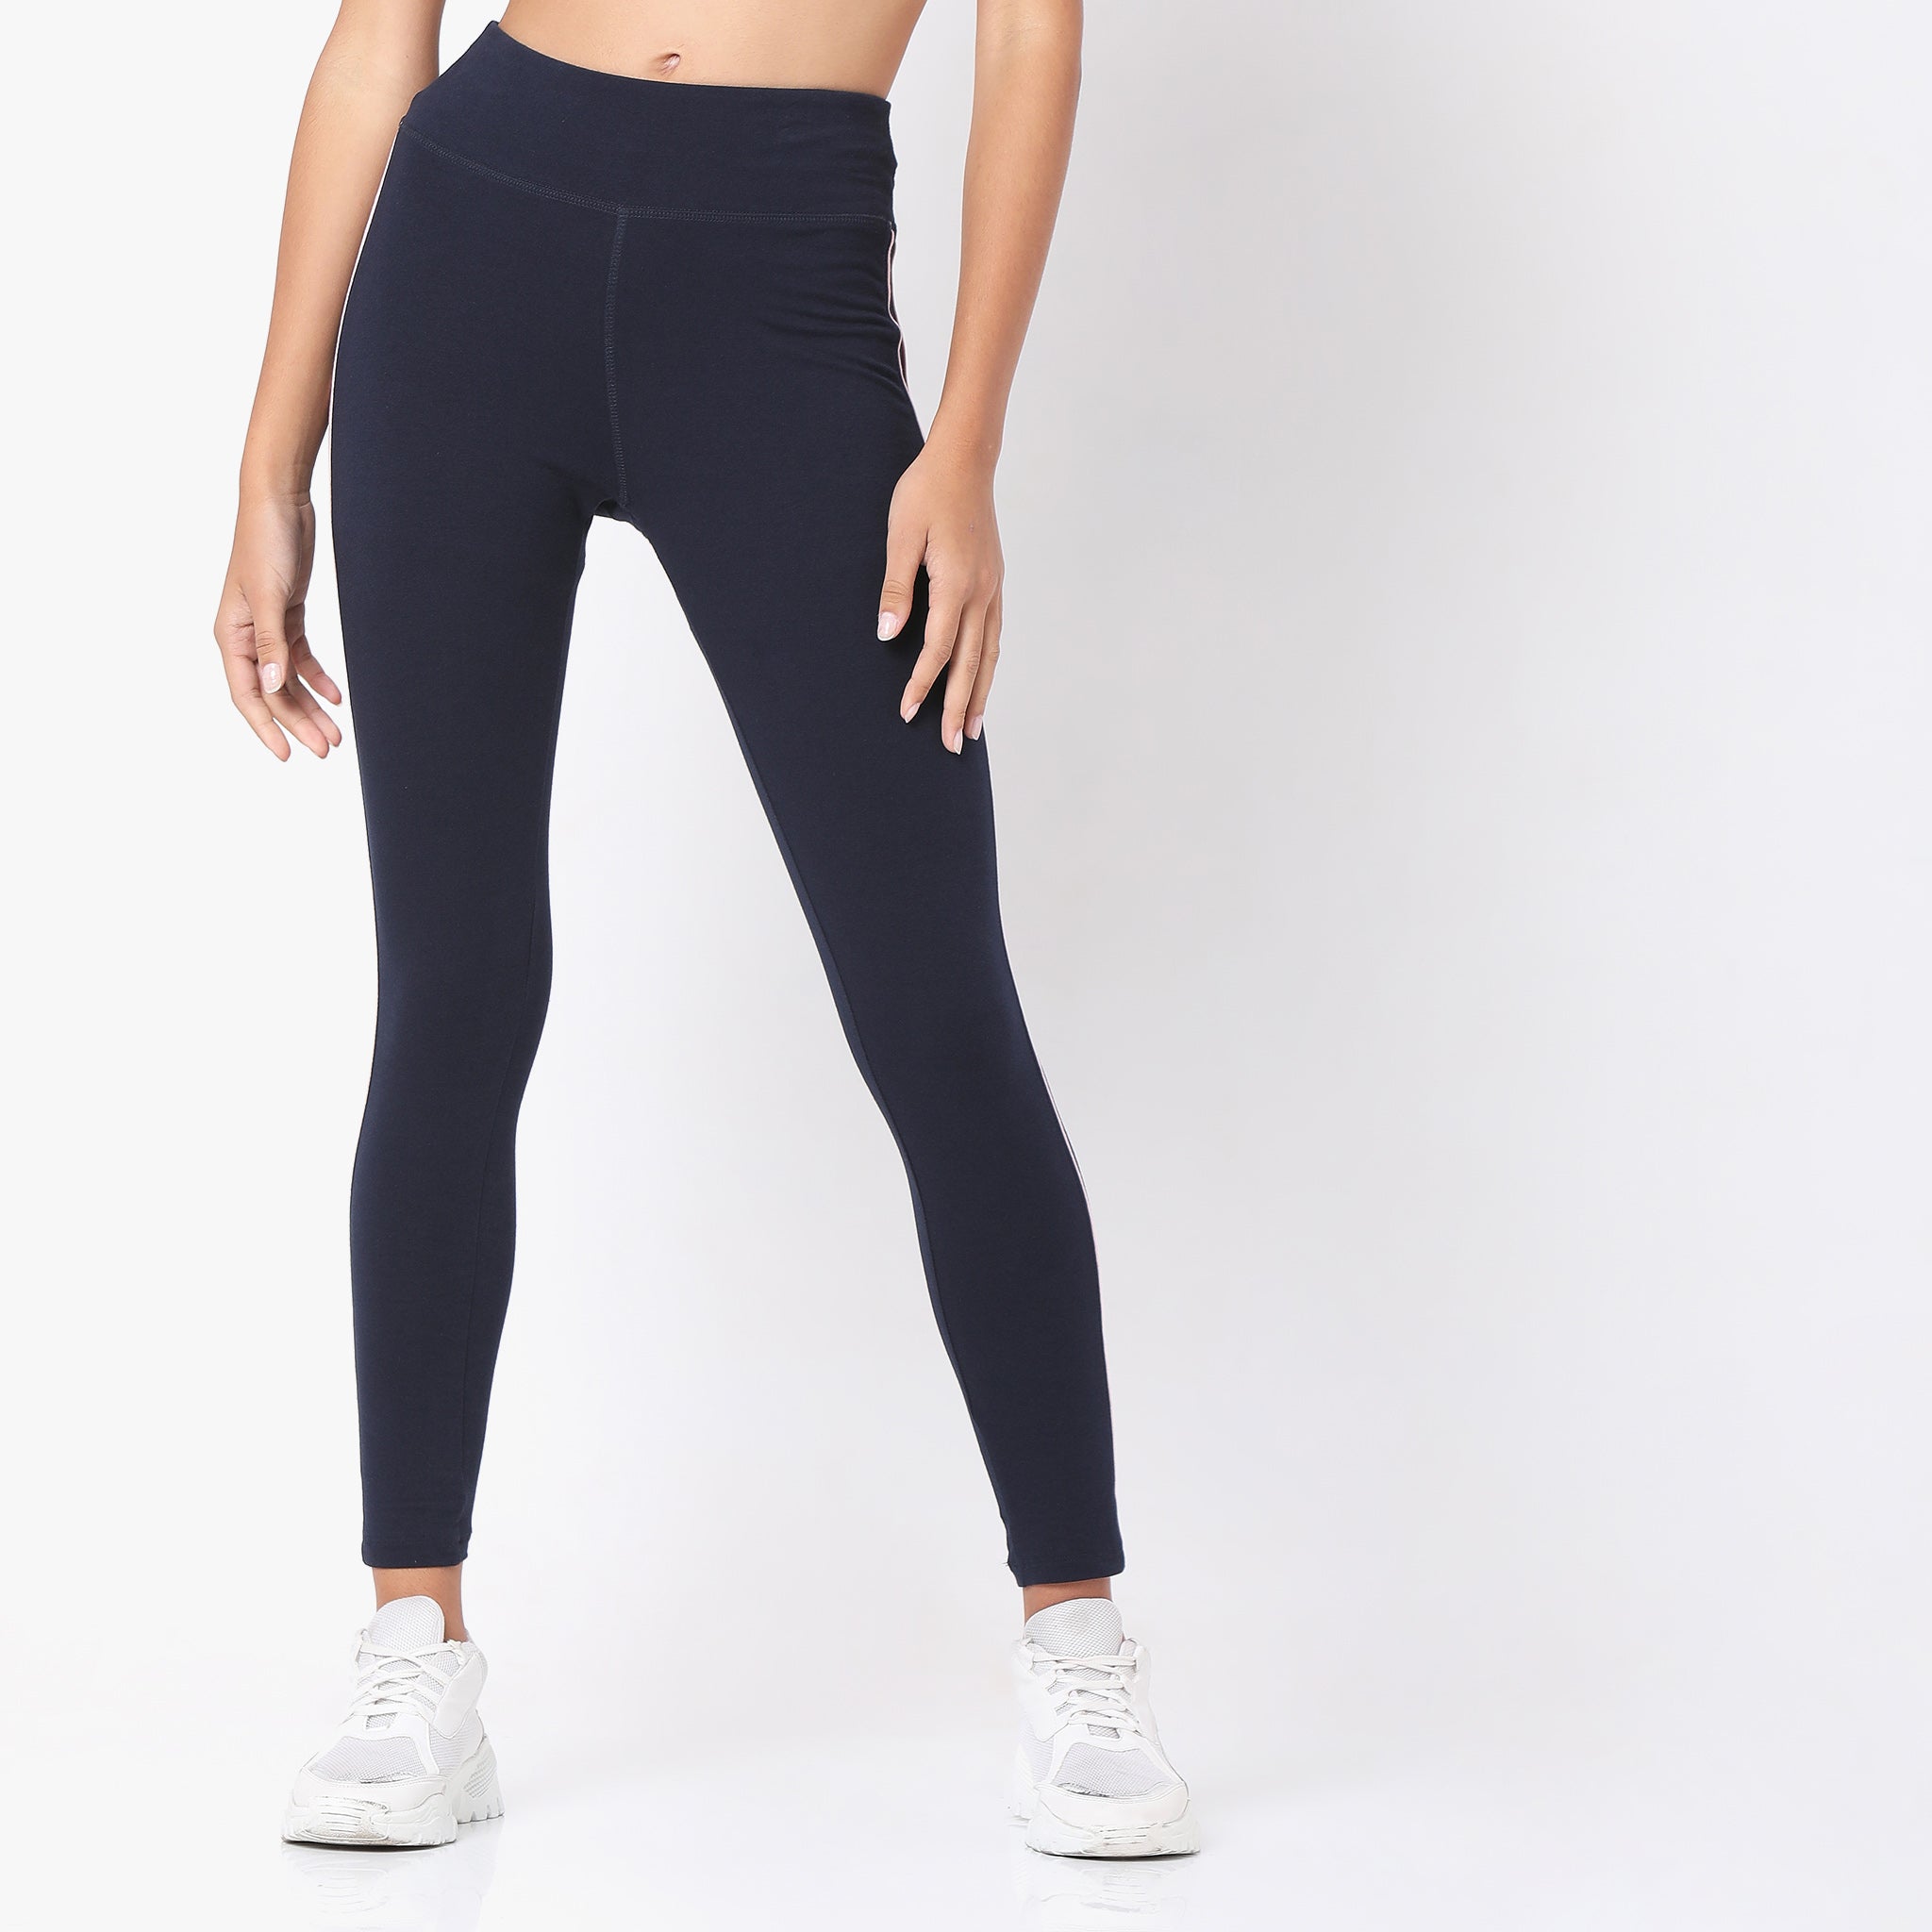 Women Wearing Relaxed Fit Solid Mid Rise Legging